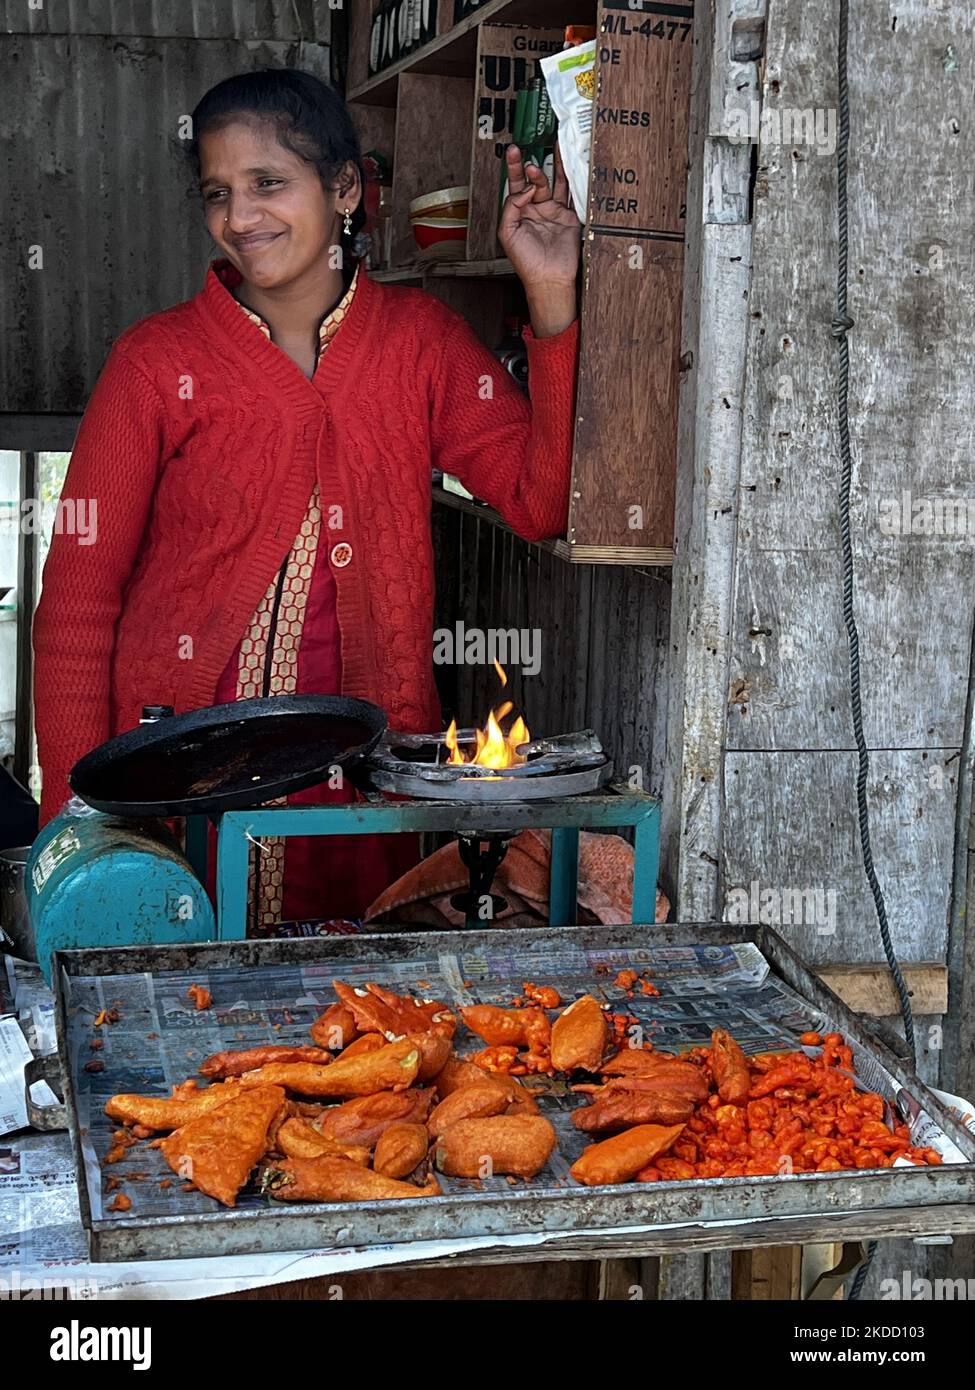 Woman selling fried snacks at a small food shack near the Guna Caves (Devils Kitchen) in Kodaikanal, Tamil Nadu, India, on May 16, 2022. Guna Caves is a series of caves and caverns as well as a sightseeing place which is famous for its 3 Pillar-type Rocks. Devils Kitchen is the original name of this place, but following the Blockbuster Kamal Hassan movie titled Guna (which was filmed in these caves), they are now known as the Guna Caves by Indian tourists. 13 people have died while trying to enter the Caves. (Photo by Creative Touch Imaging Ltd./NurPhoto) Stock Photo